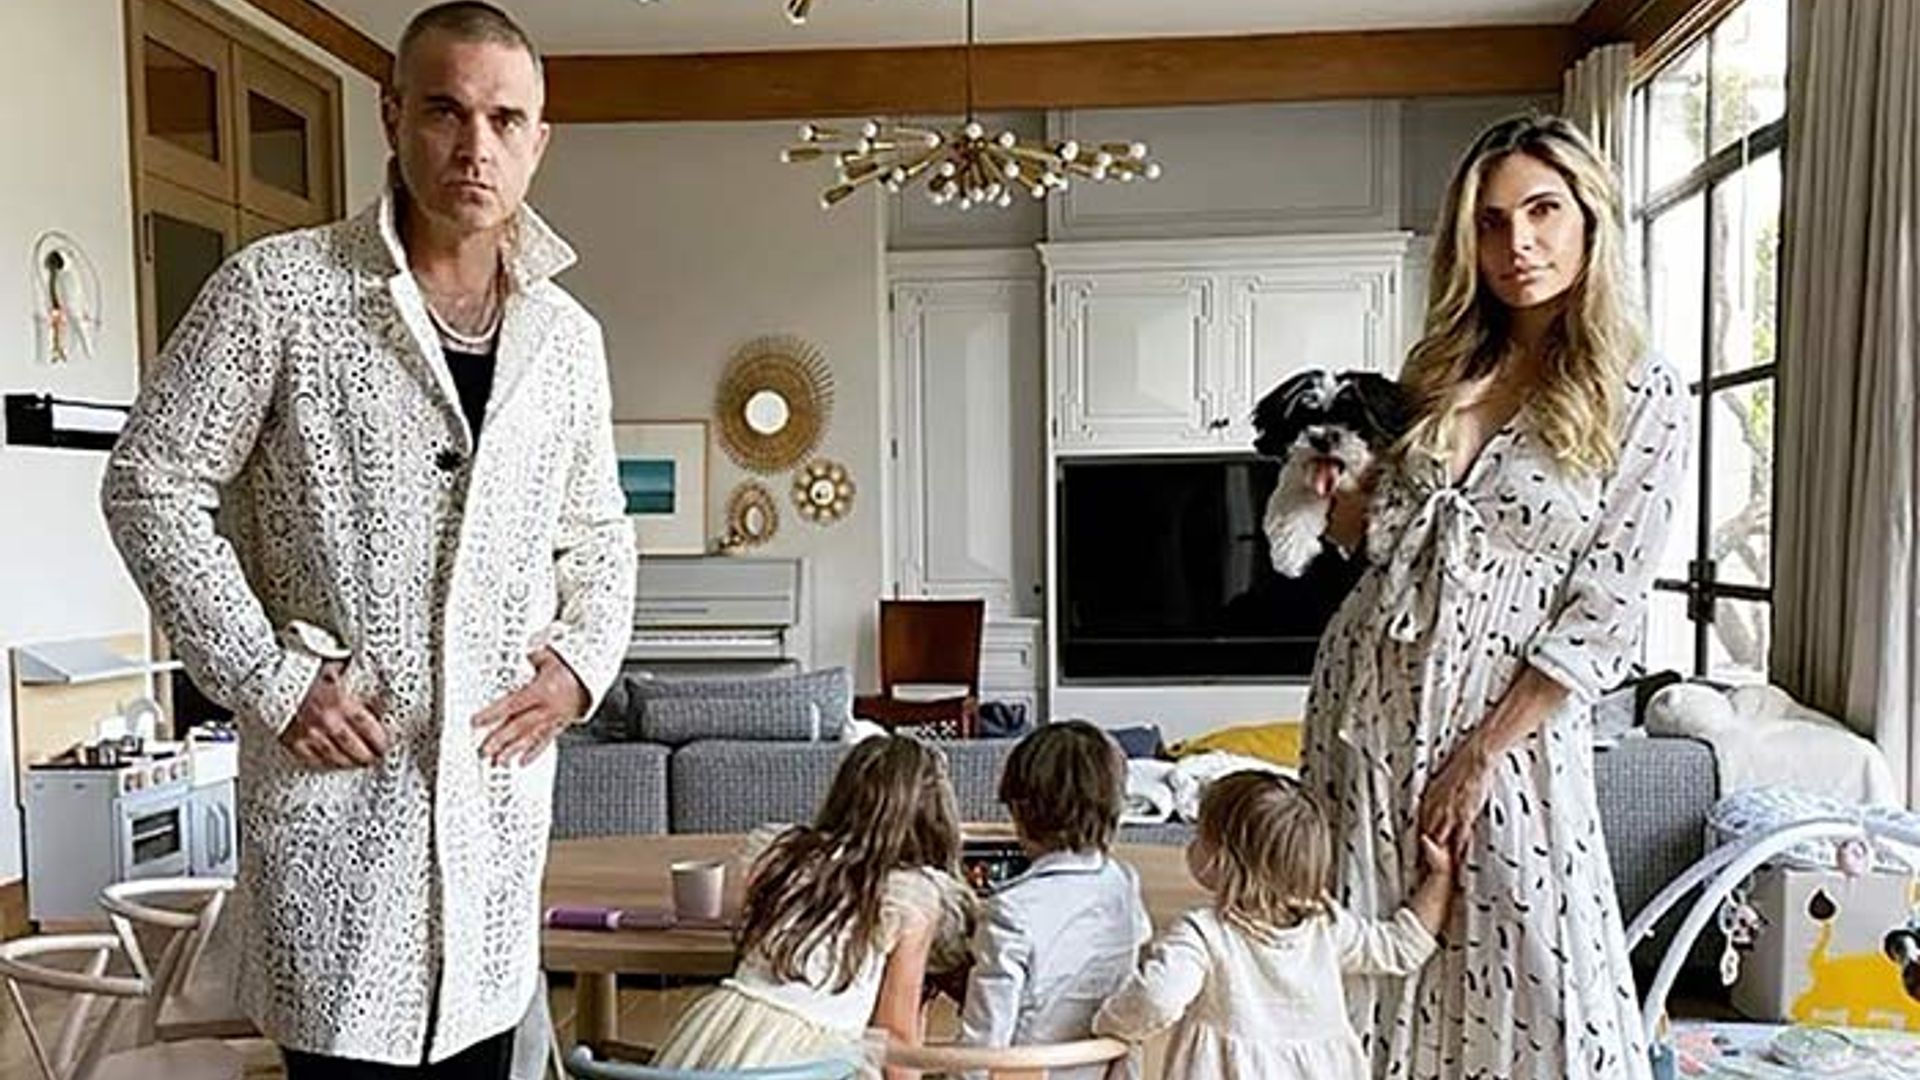 Robbie Williams and Ayda Field show off children's dreamy bedroom | HELLO!